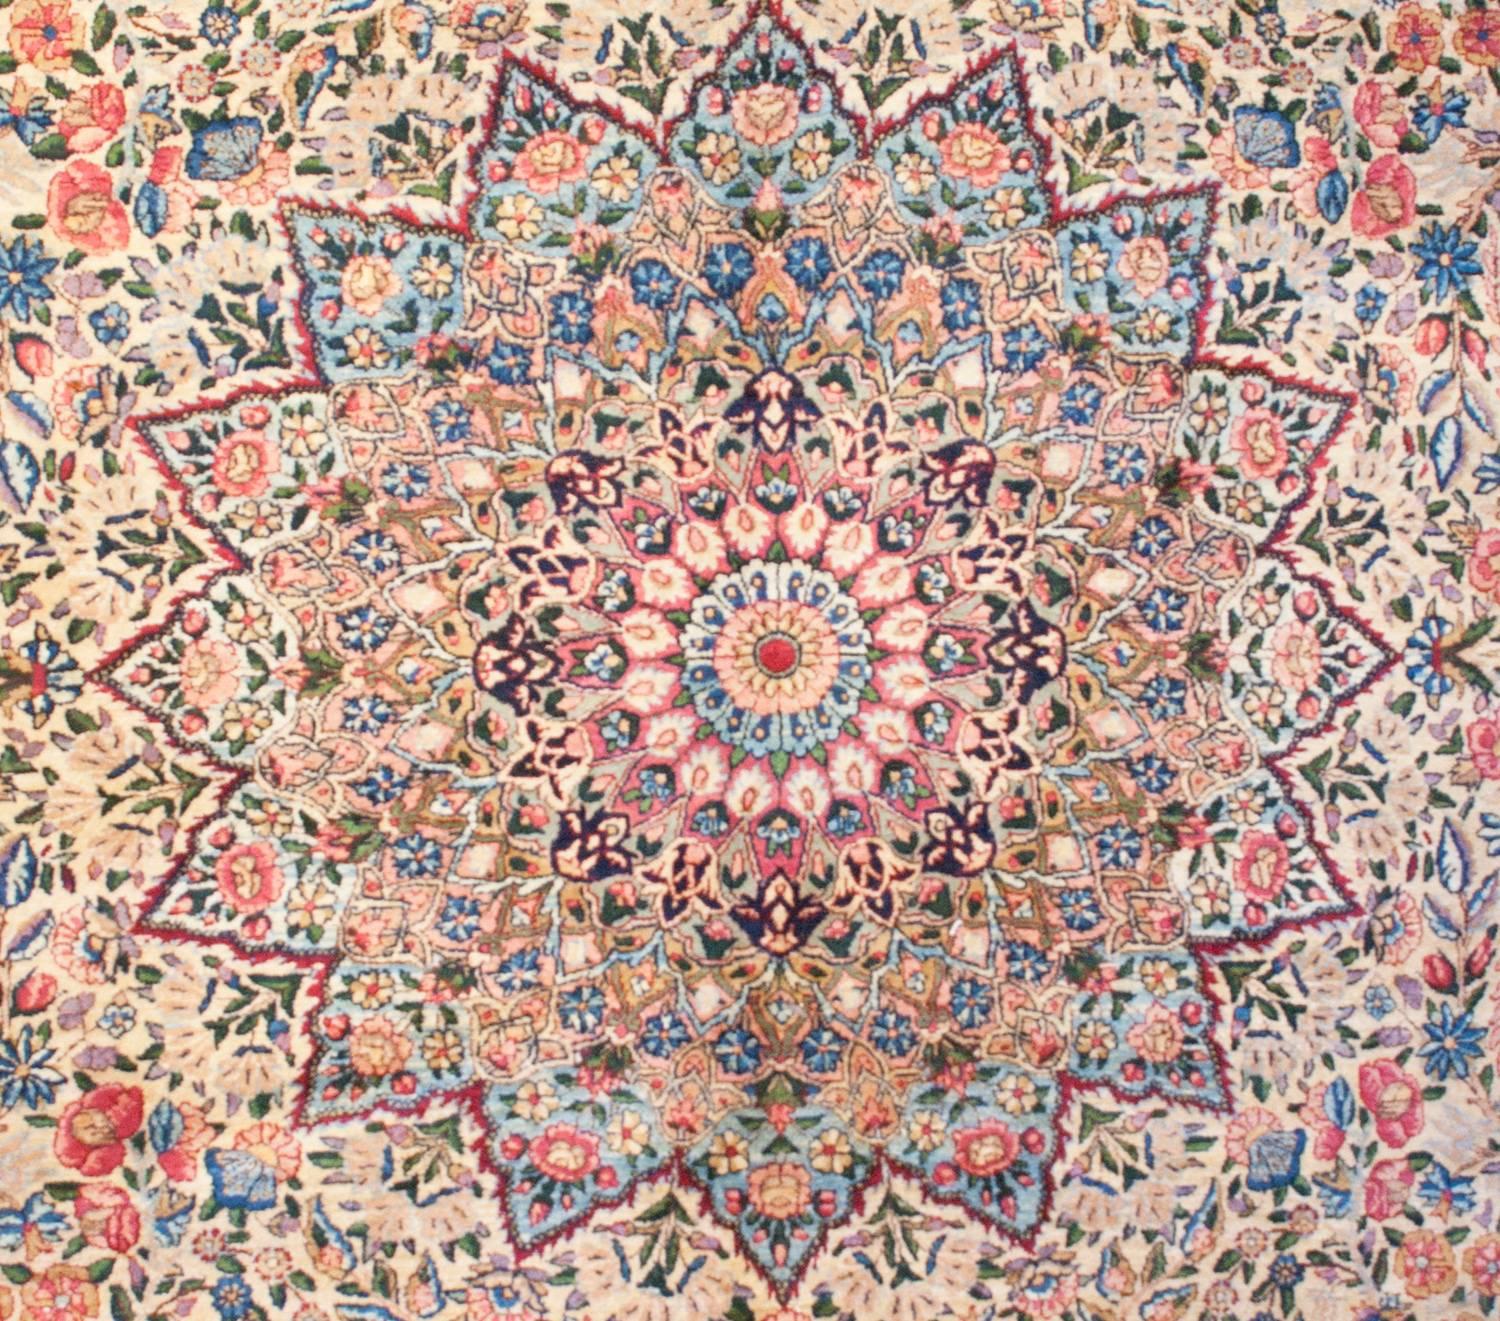 An amazing early 20th century Persian Kirman with the most elaborately woven multicolored design of scrolling vines with myriad flowers on a cream background. The medallion is the best we've seen! Like a kaleidoscope, the pattern radiates from the